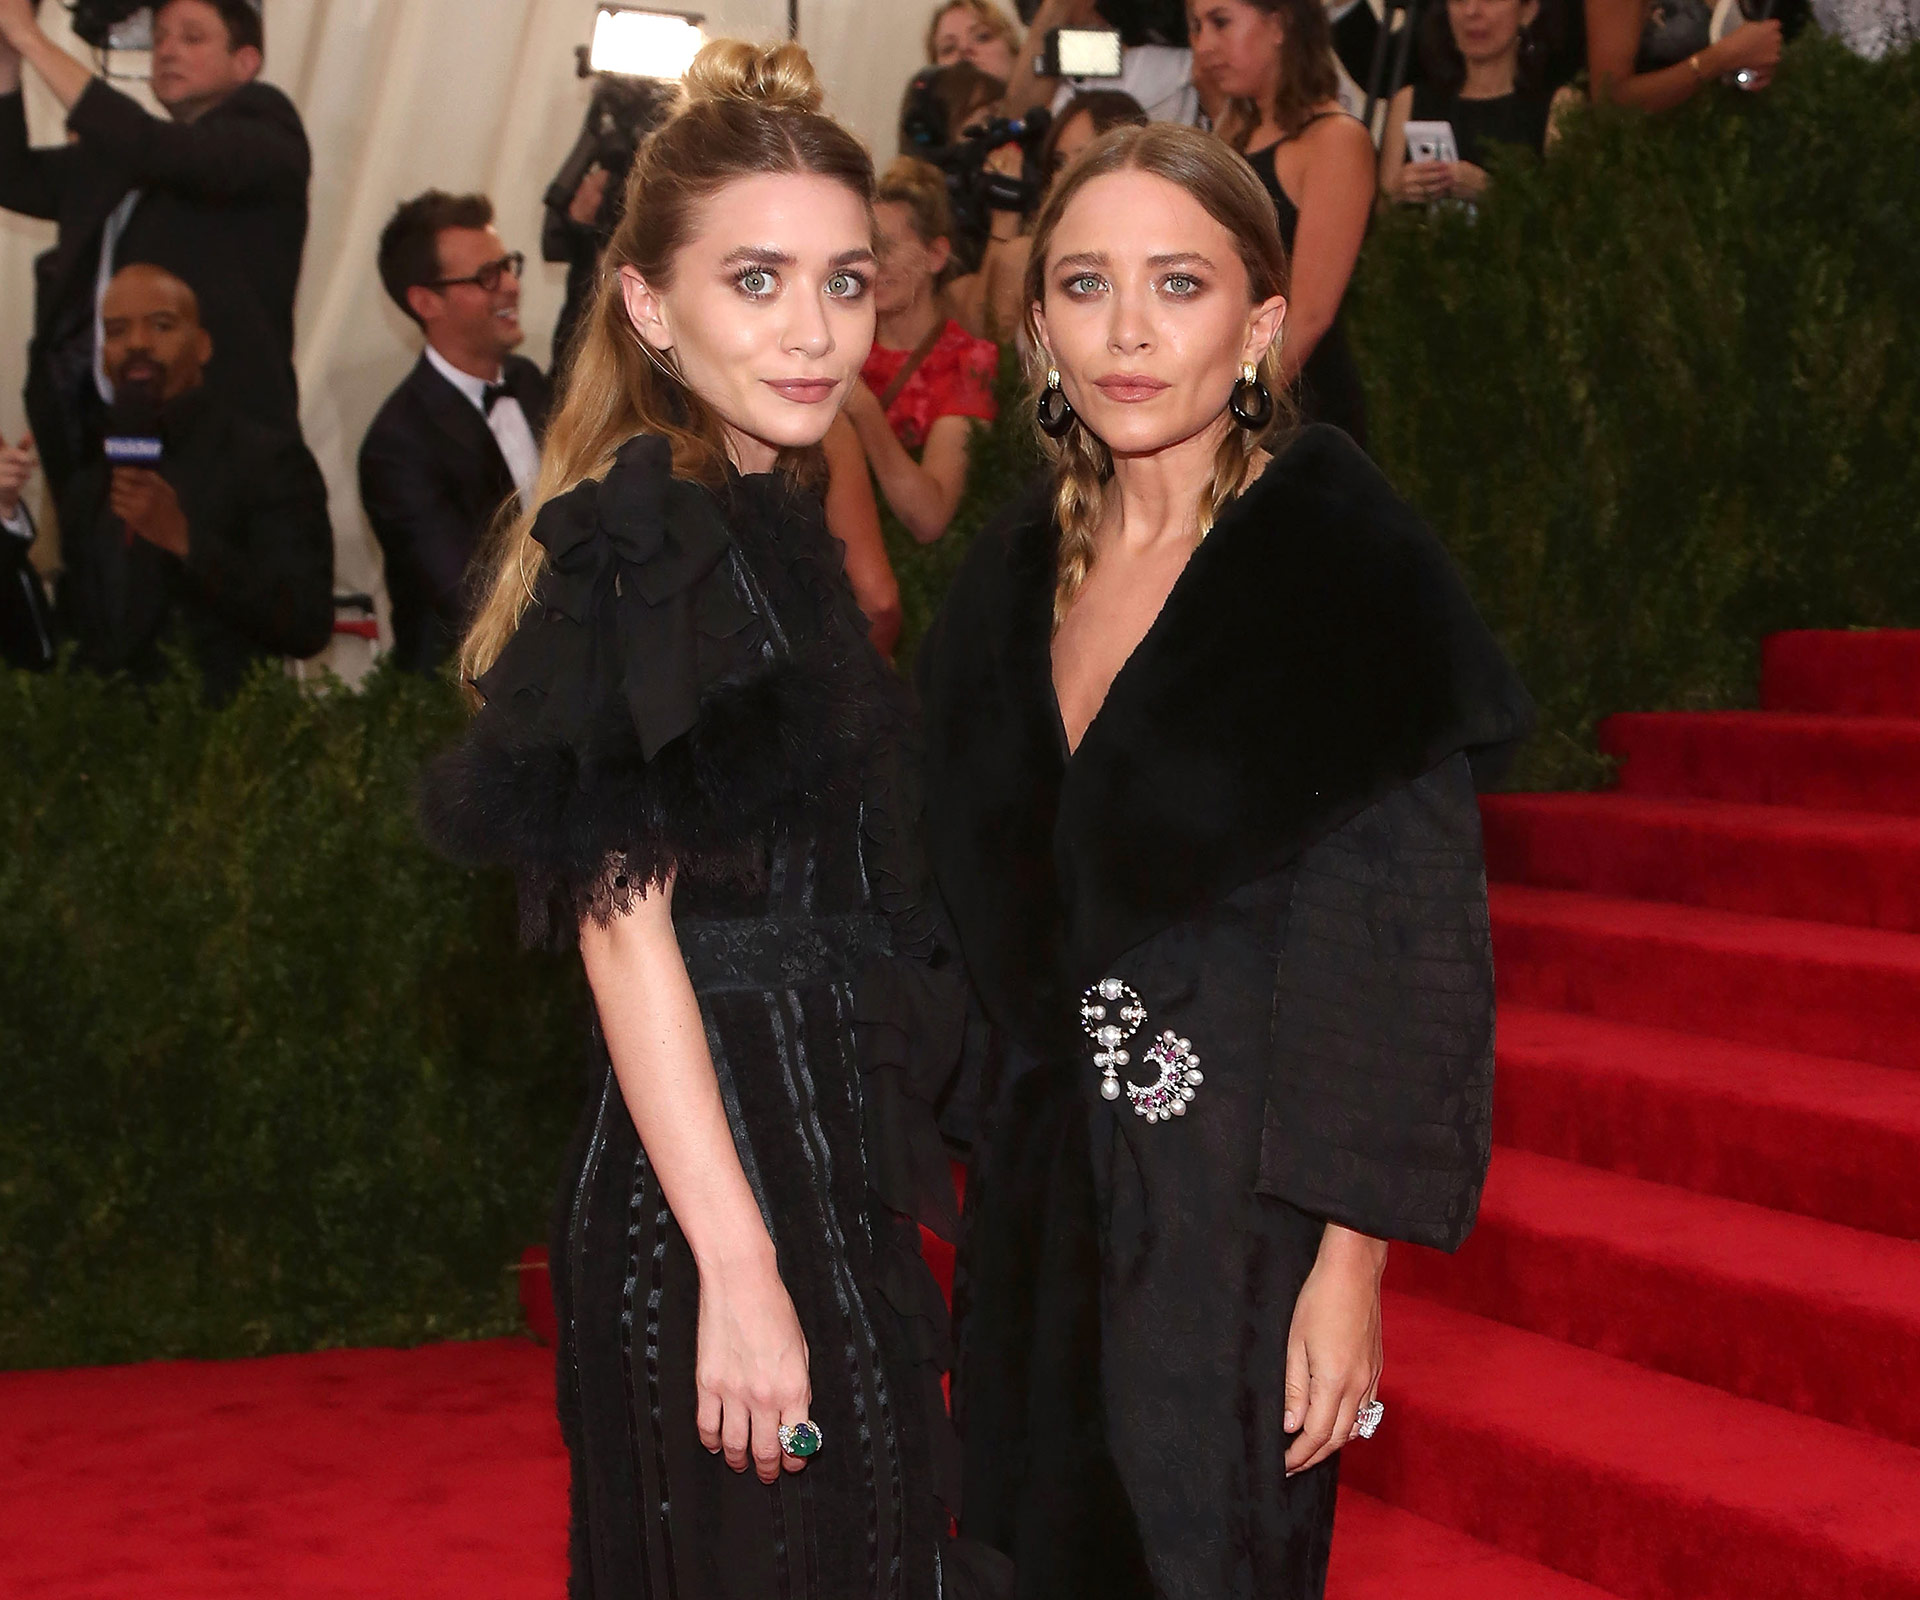 Famous twins Mary-Kate and Ashley Olsen